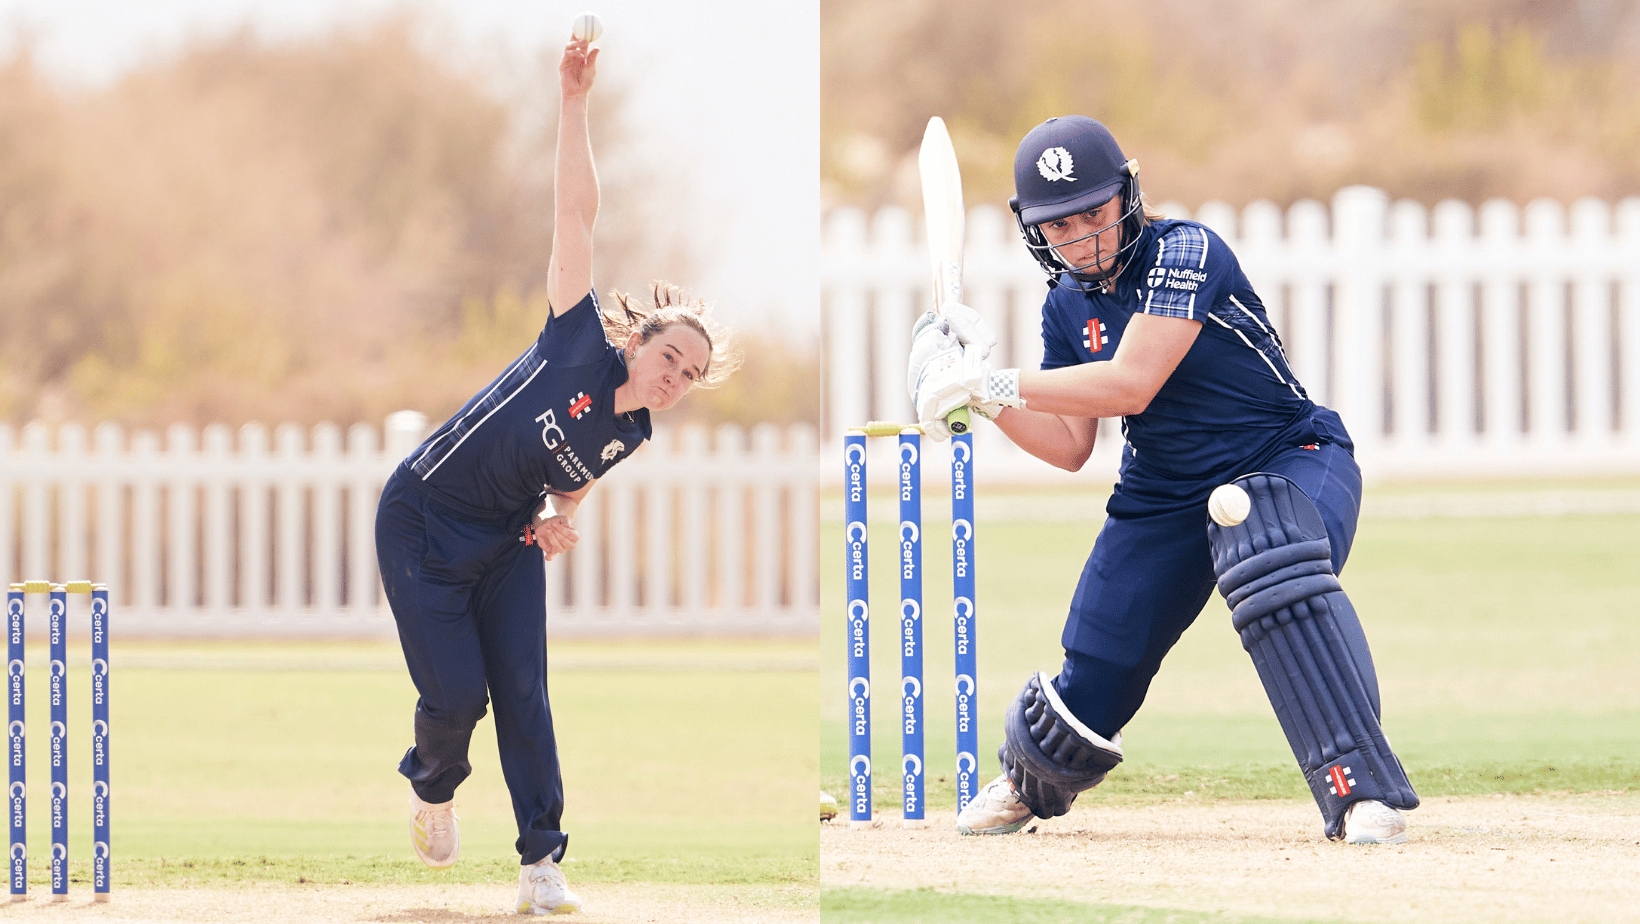 AILSA AND HANNAH SIGN UP WITH THUNDER